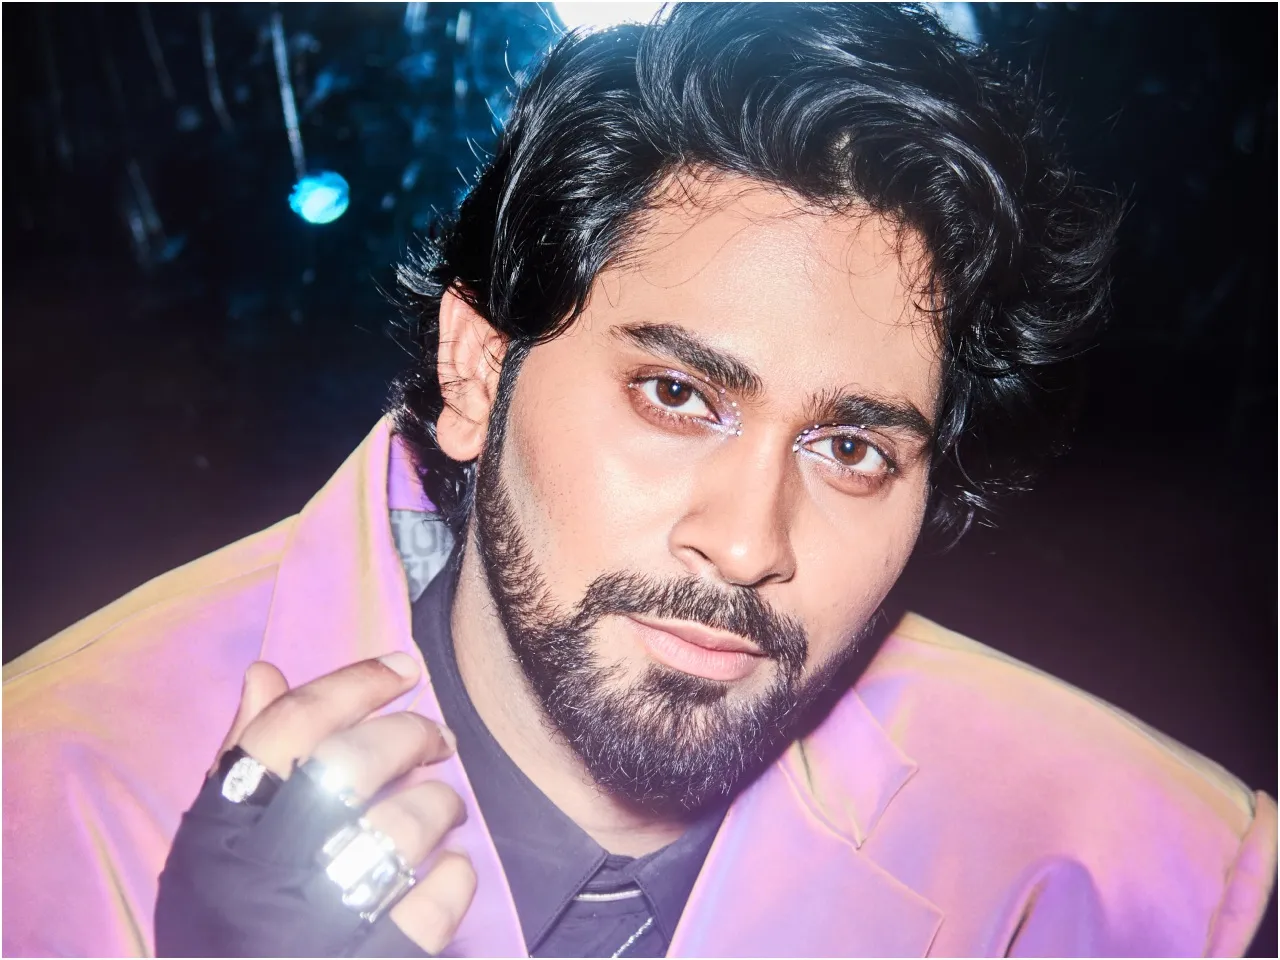 Ankush Bahuguna makes history as first Indian male beauty content creator to debut at the 77th Cannes Film Festival